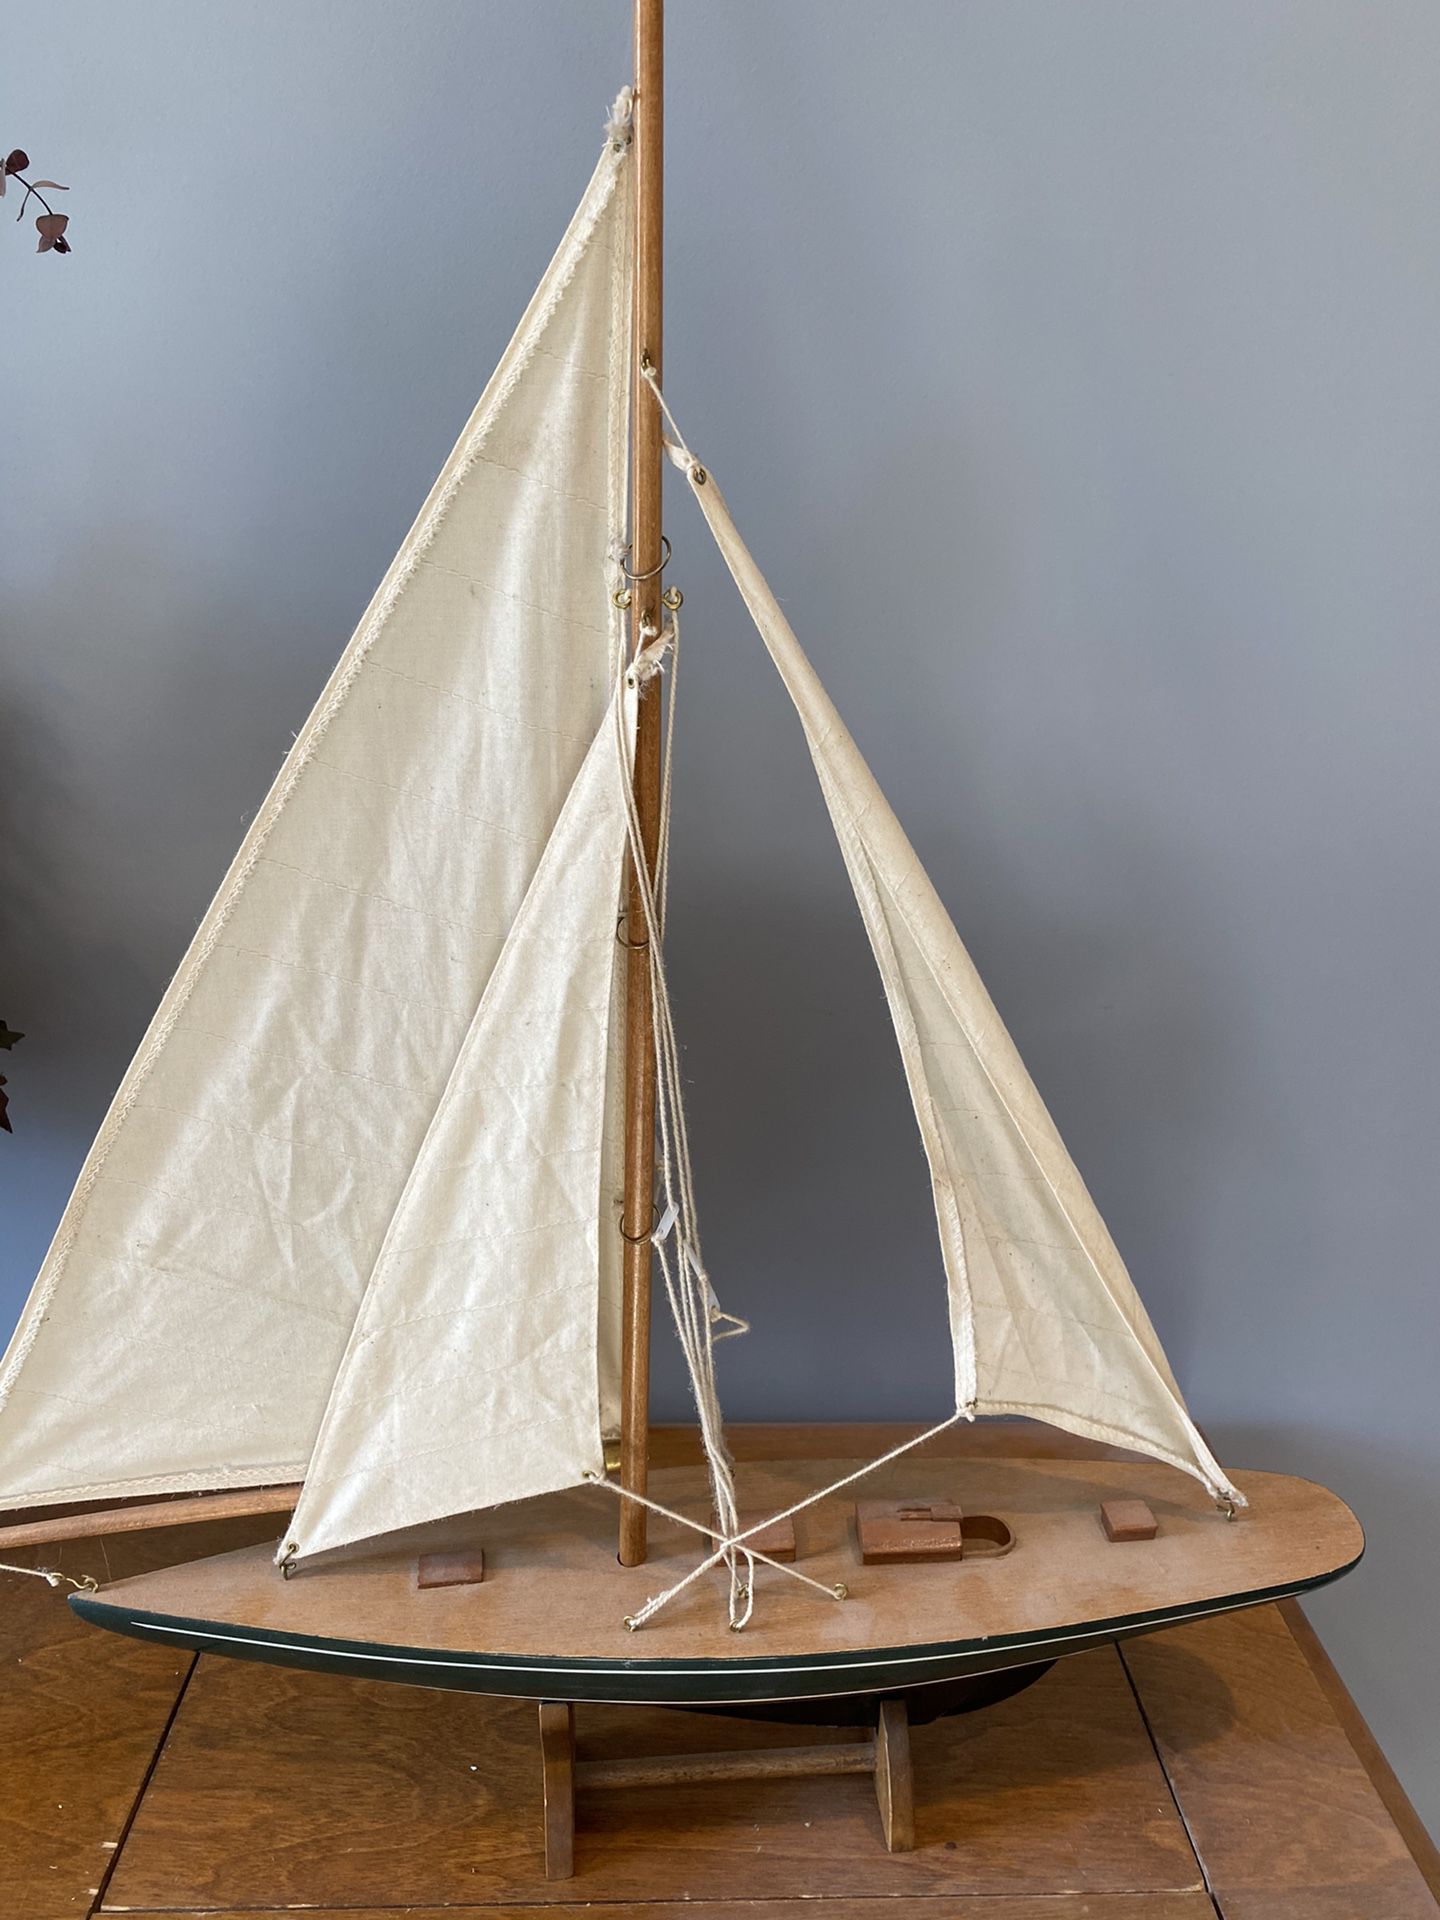 Sail boat with stand